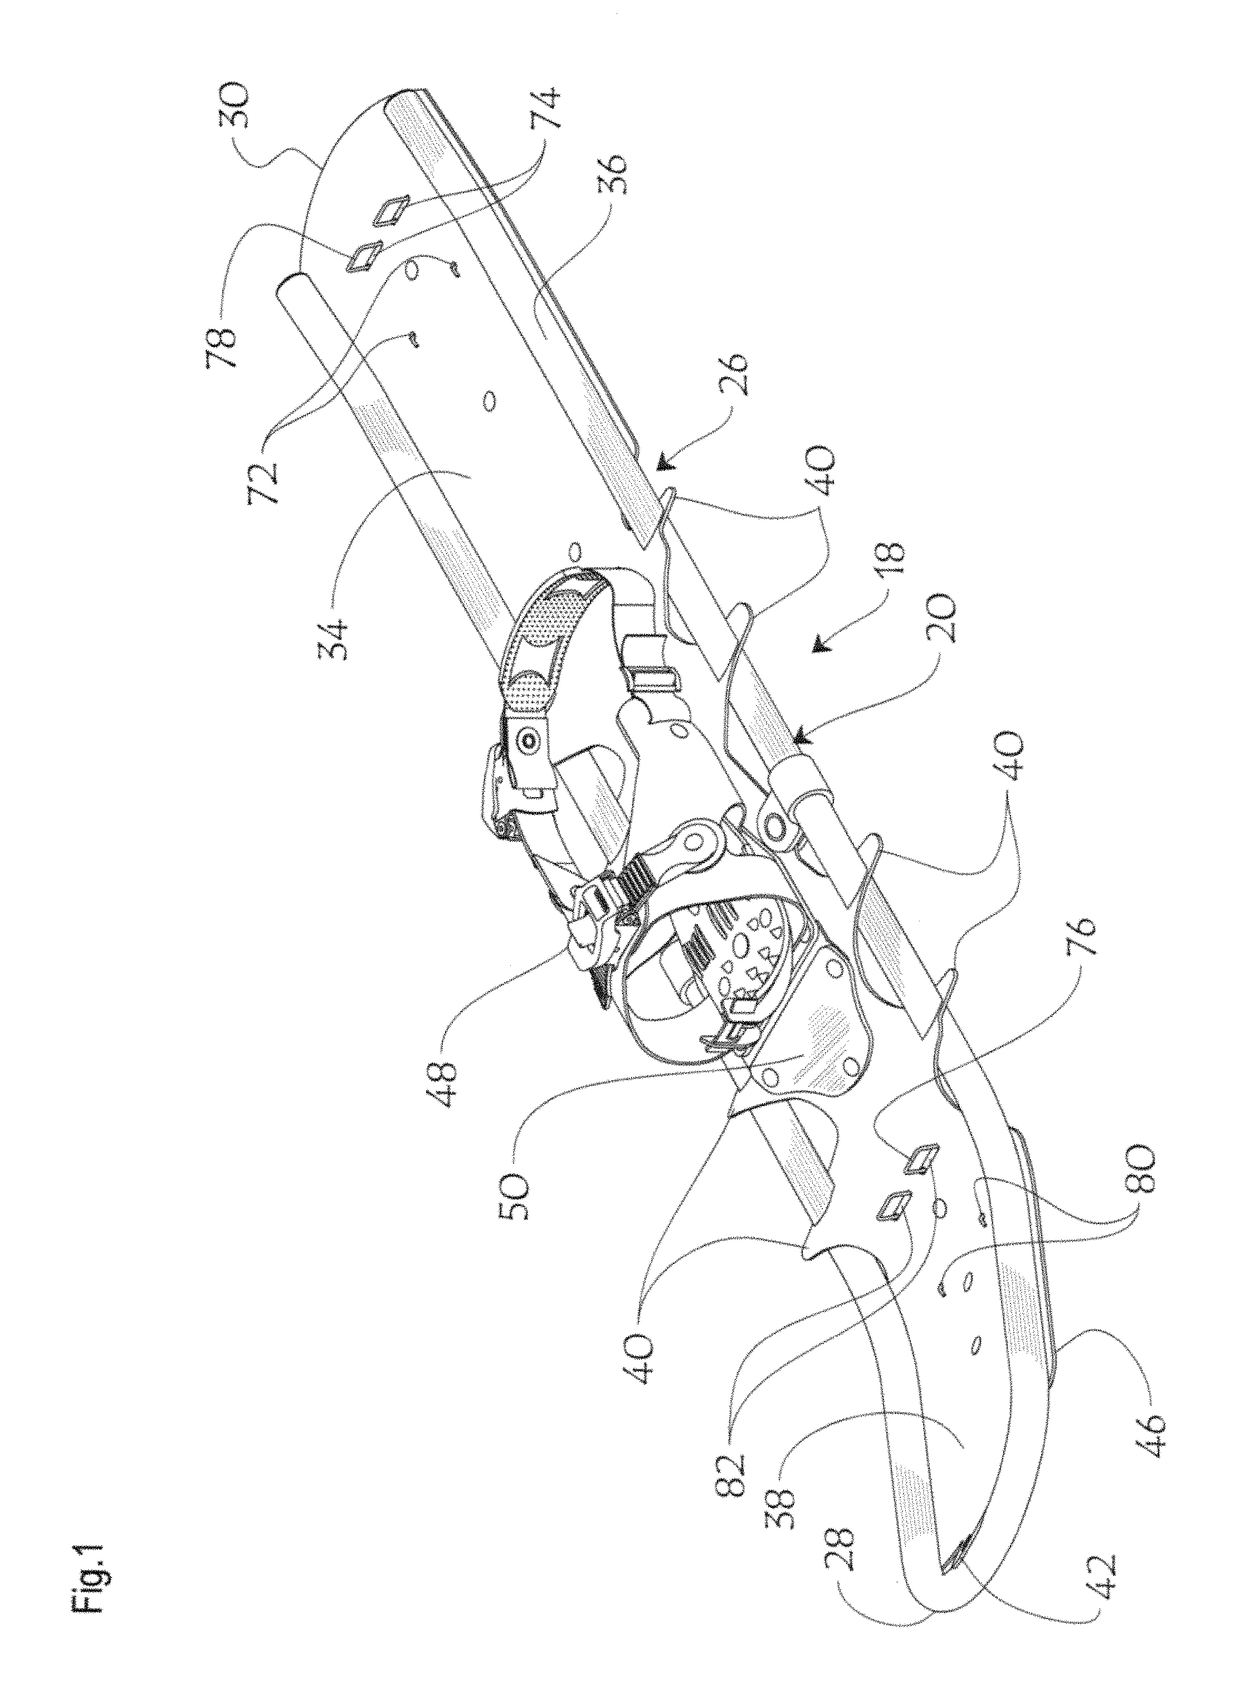 Snowshoe-ski kit and method of adjusting the effective traction coefficient on a snowshoe-ski